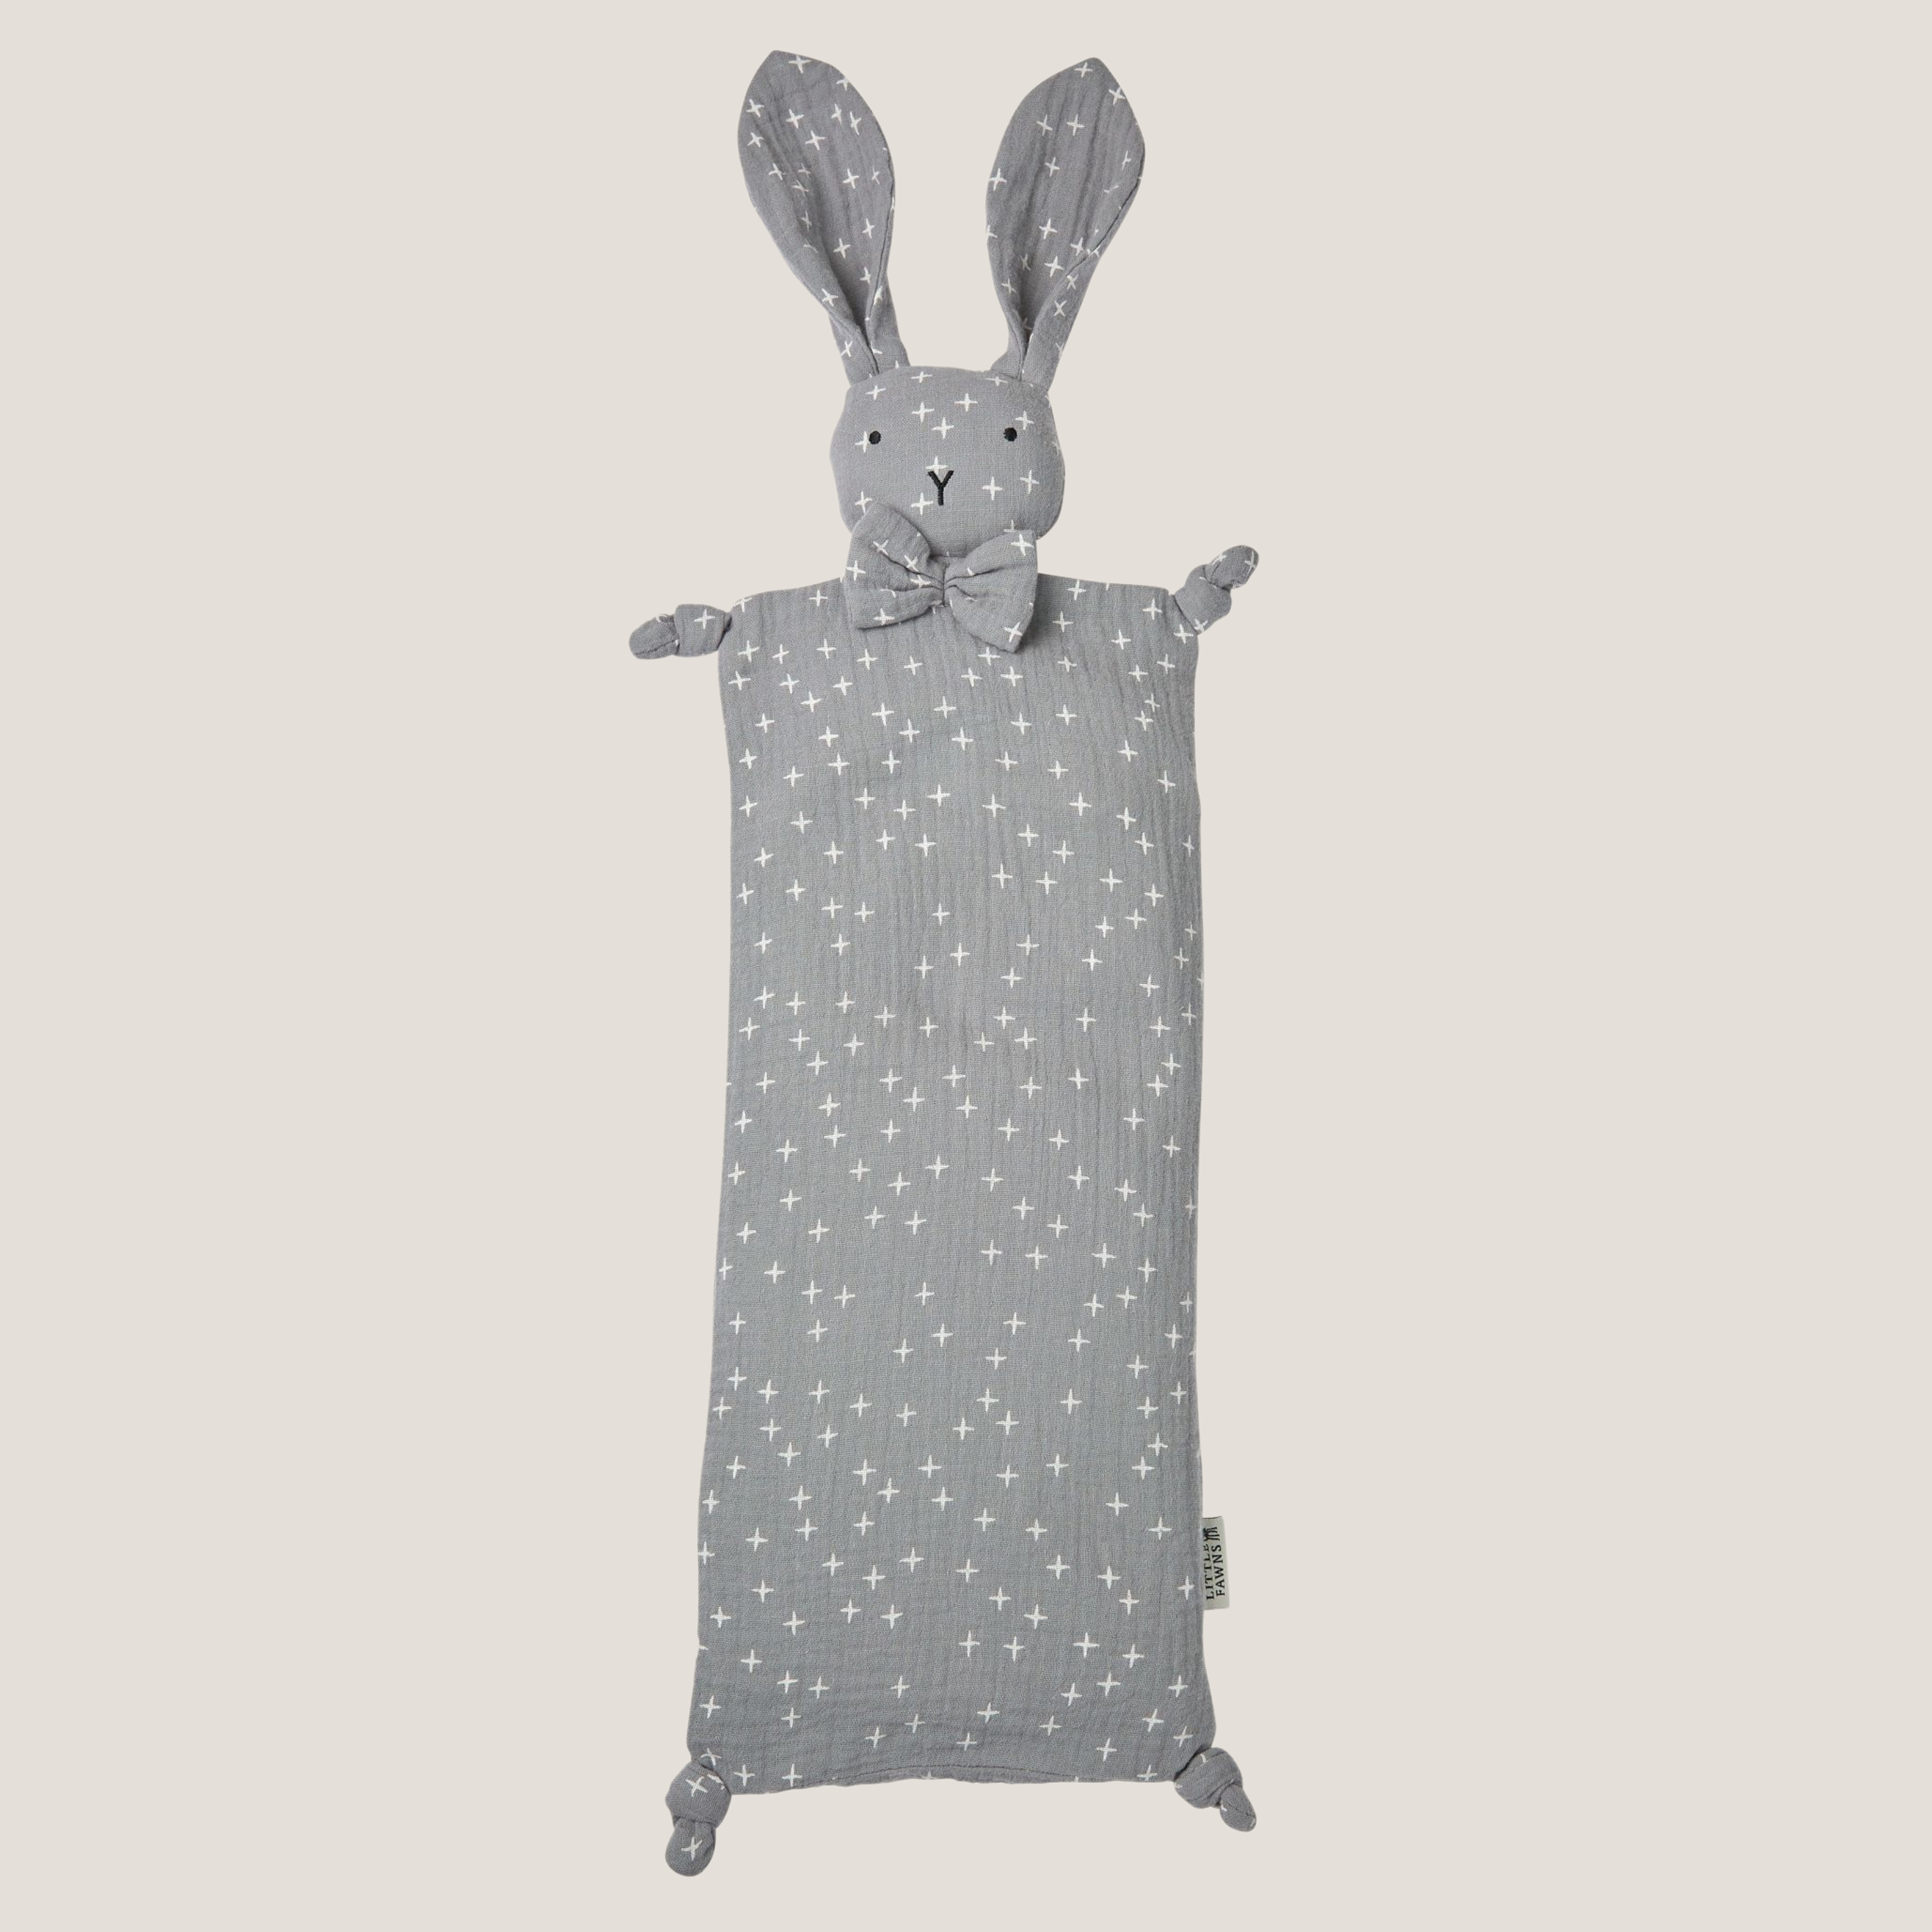 Snuggly Bunny Beansprout Husk Pillow in Pebble Grey Star